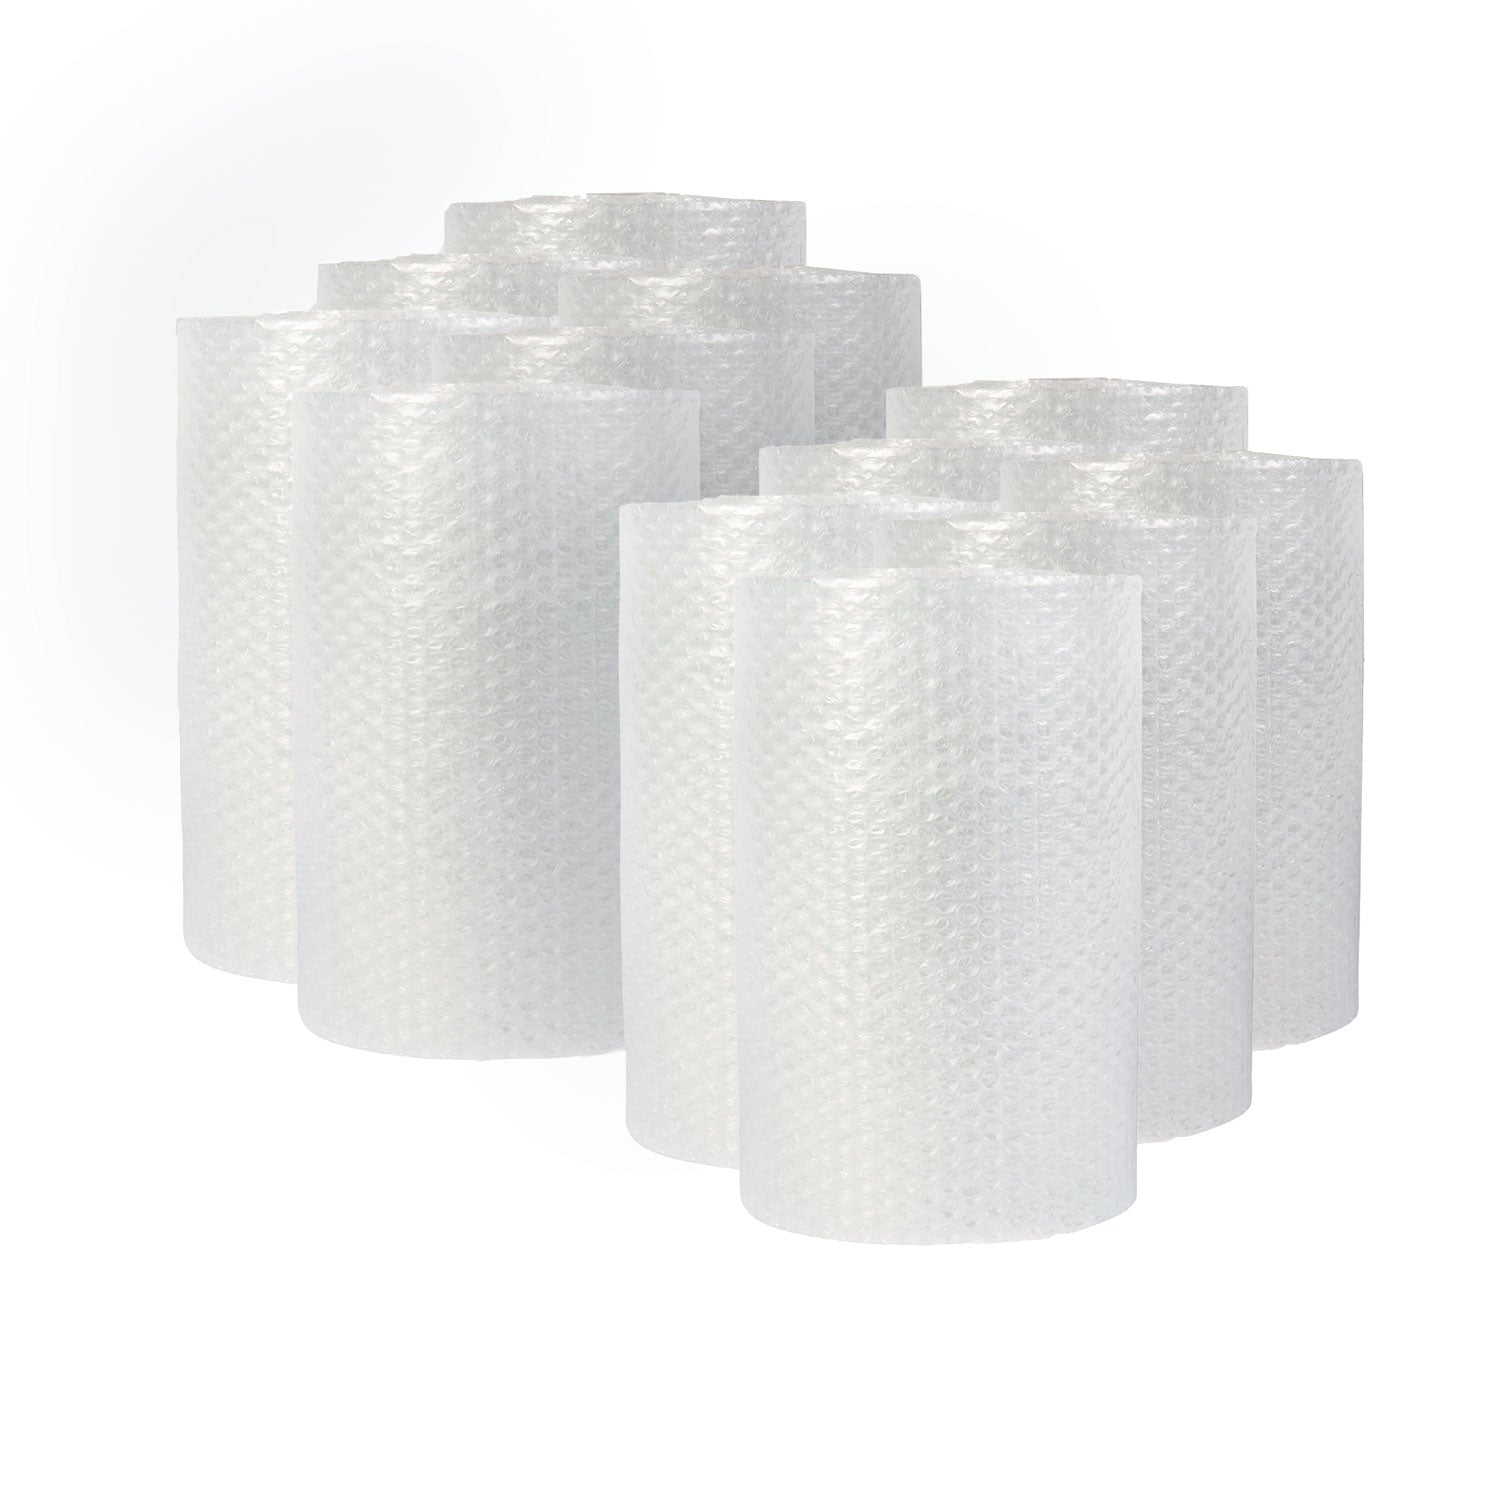 bubble-packaging-019-thick-12-x-10-ft-perforated-every-12-clear-12-carton_unv4087893 - 1